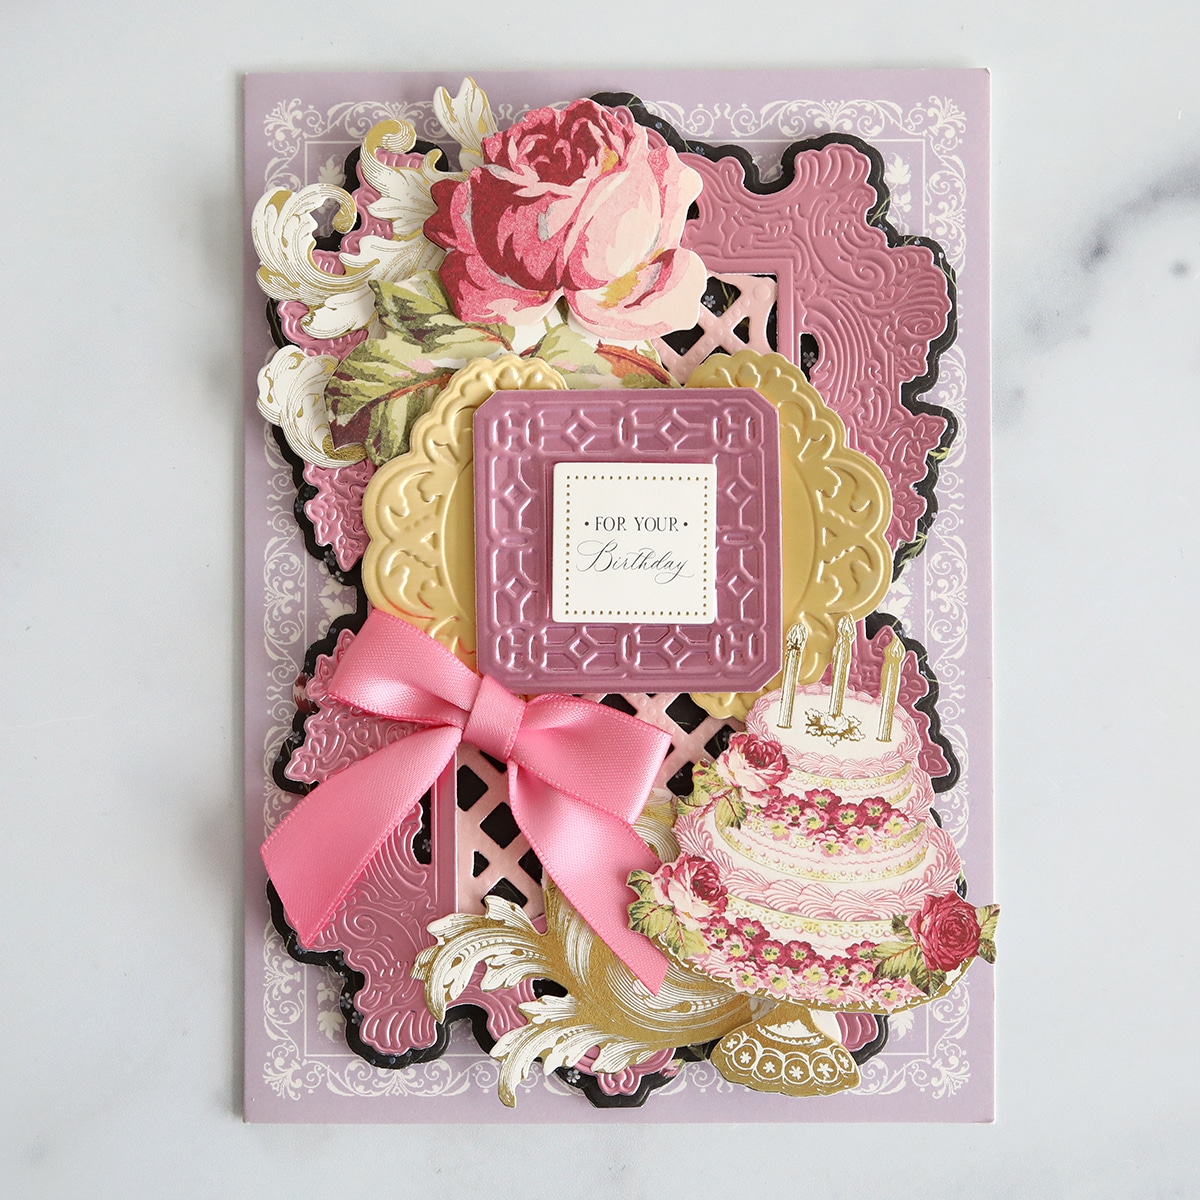 A pink and gold card with flowers and ribbons.